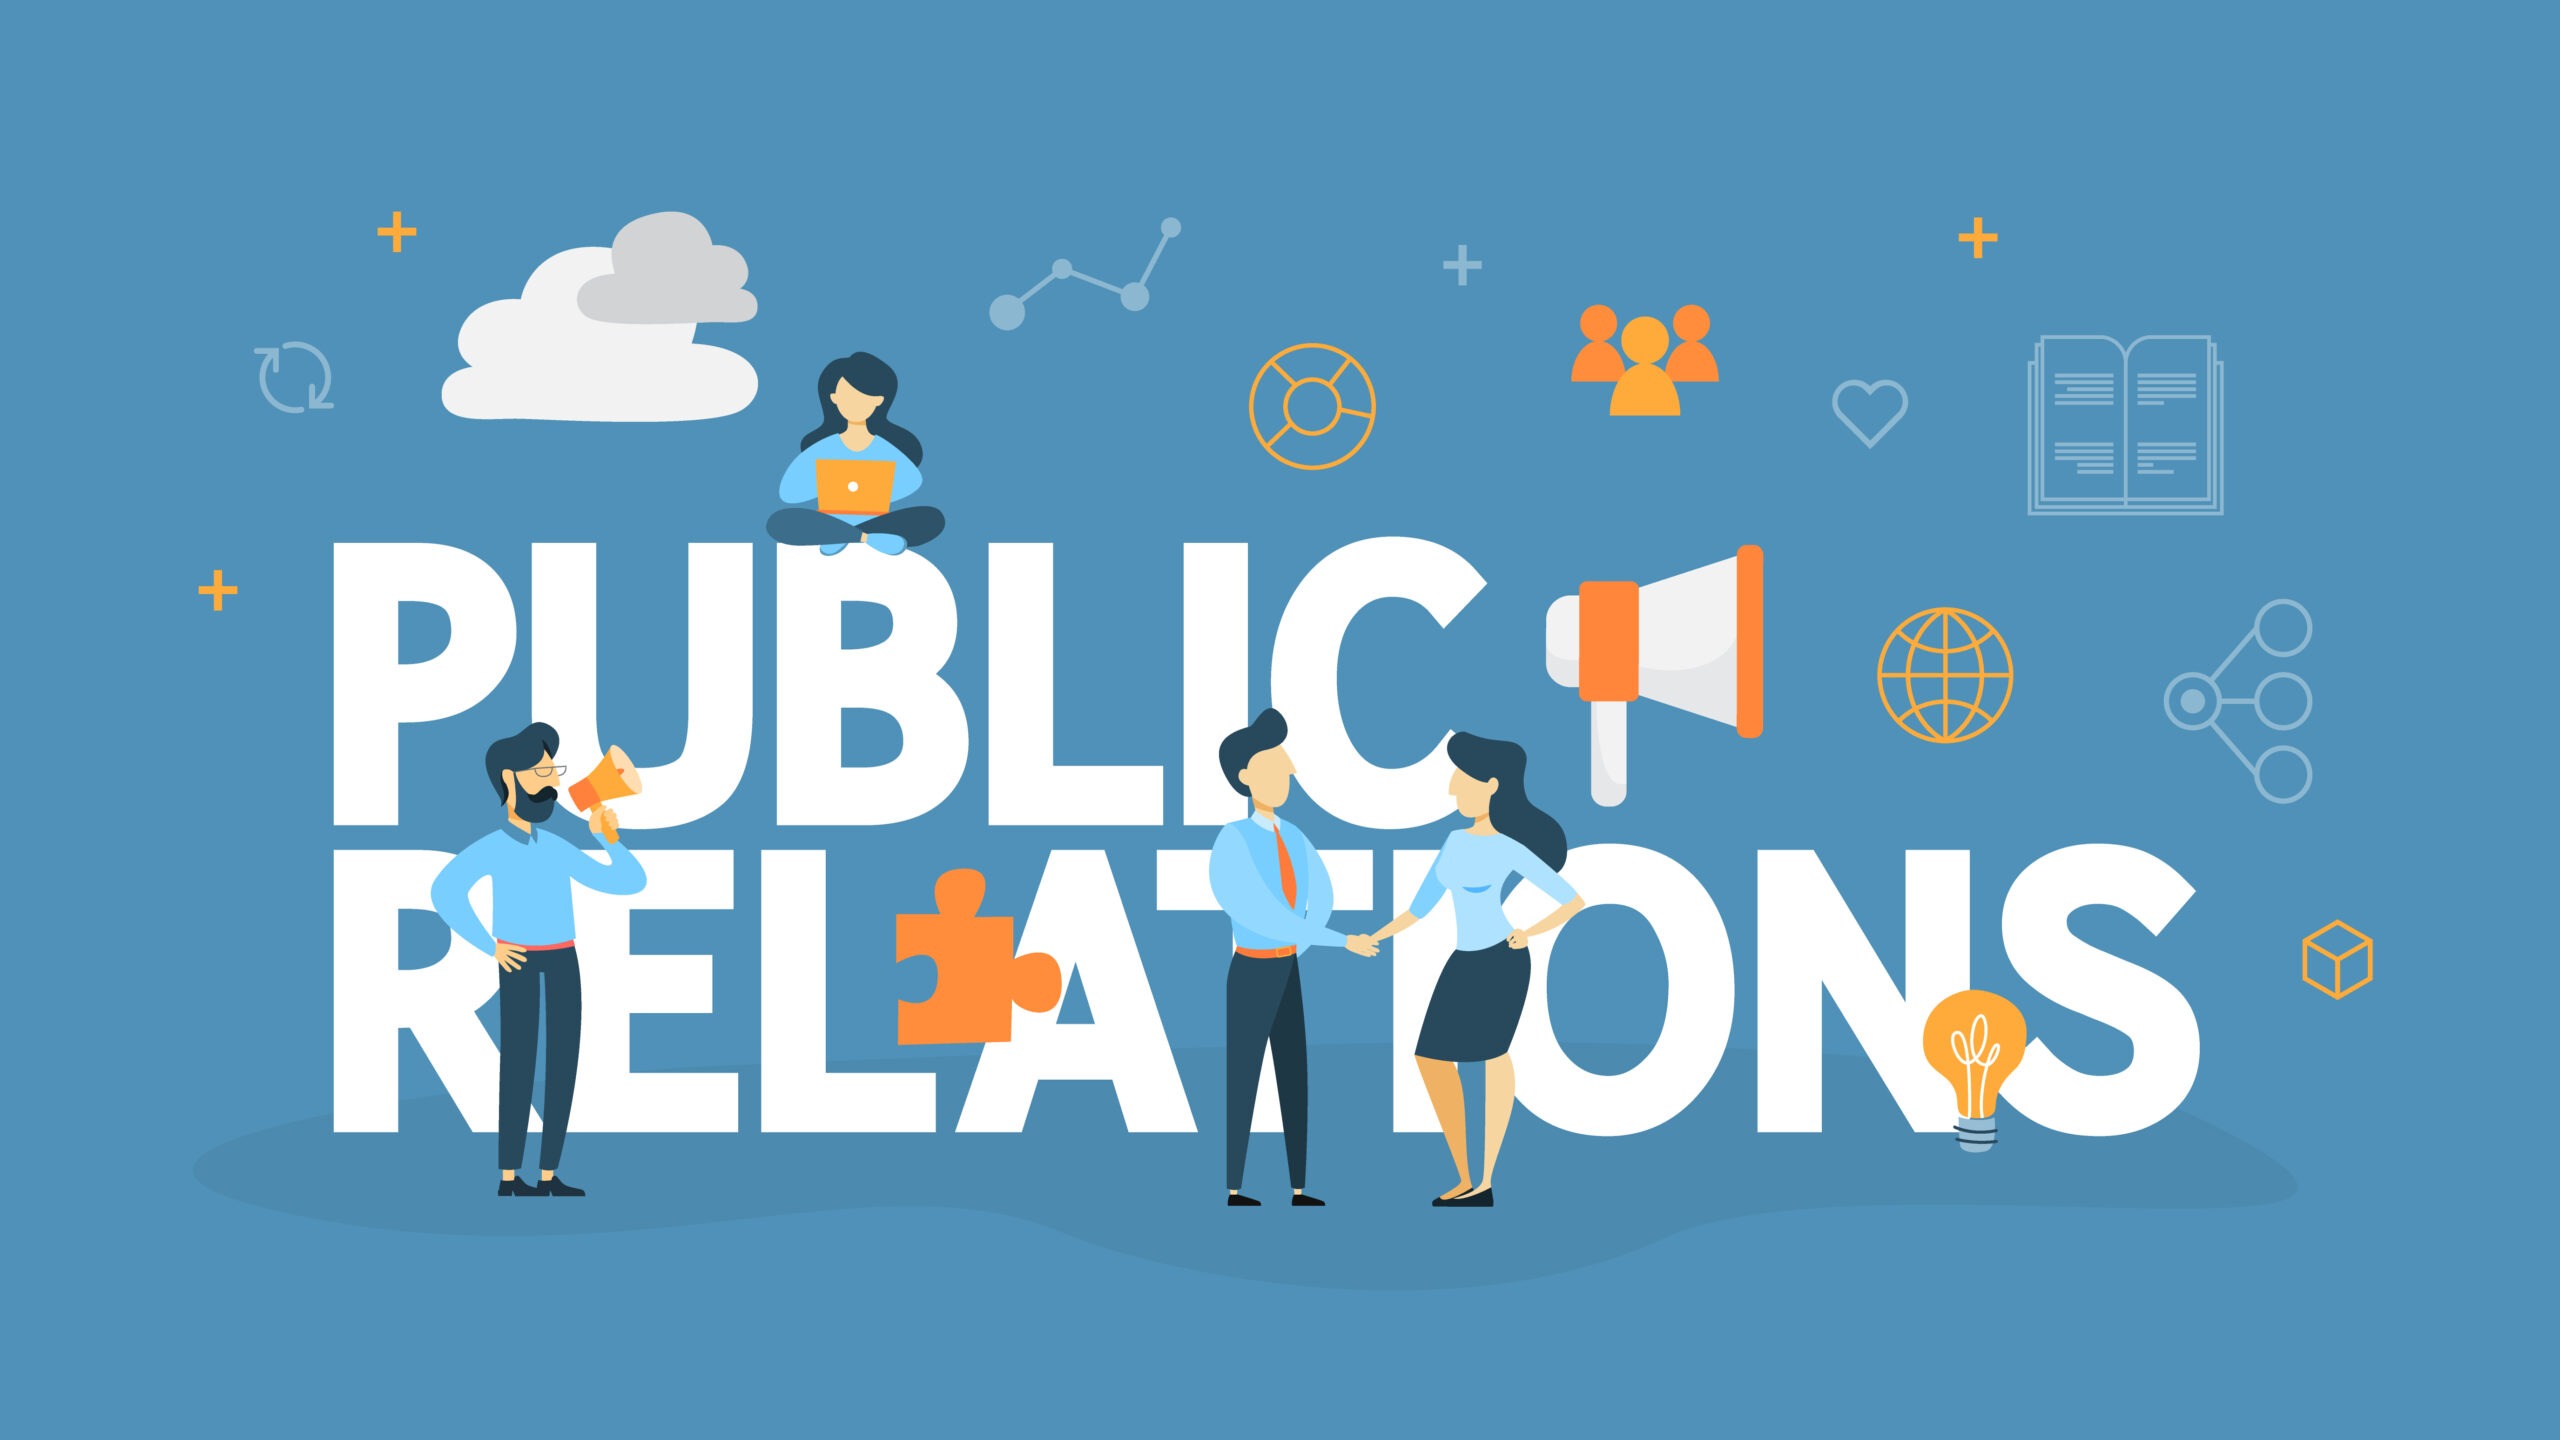 The word " Public Relations " is in the middle while there are illustrations of people touching the word and few symbols of communications.